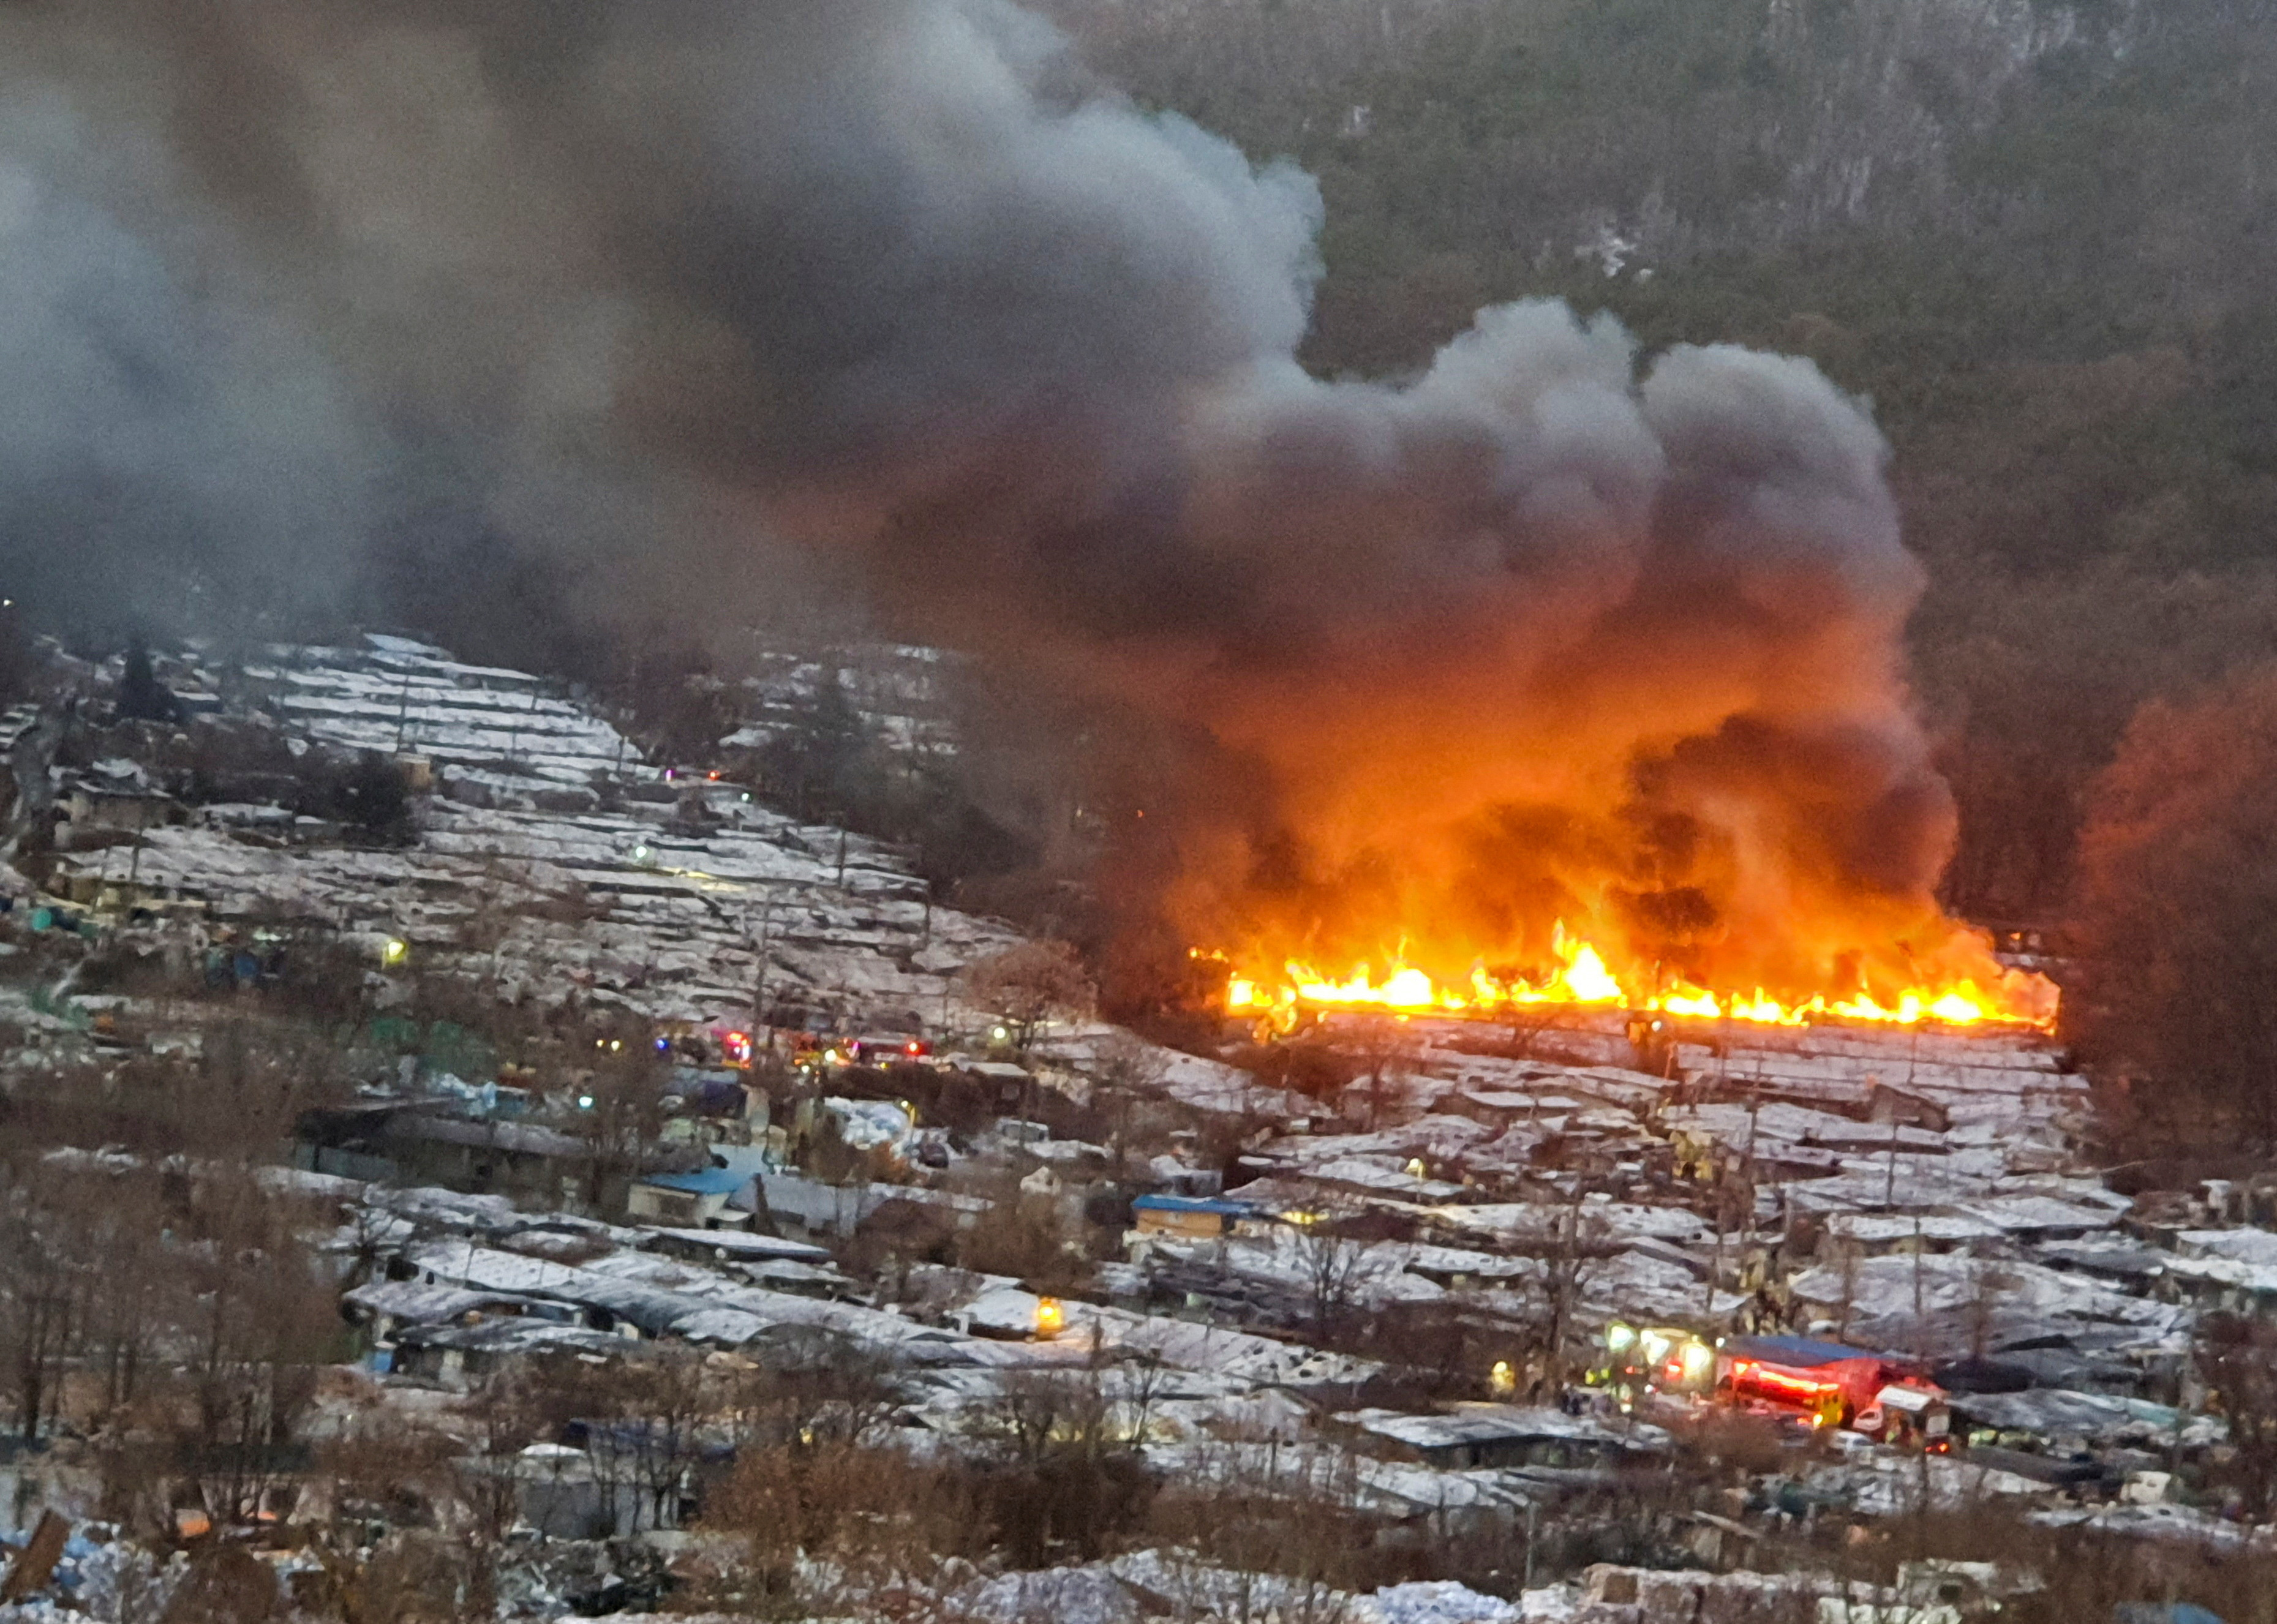 Smoke rises from a fire in Guryong Village, Seoul